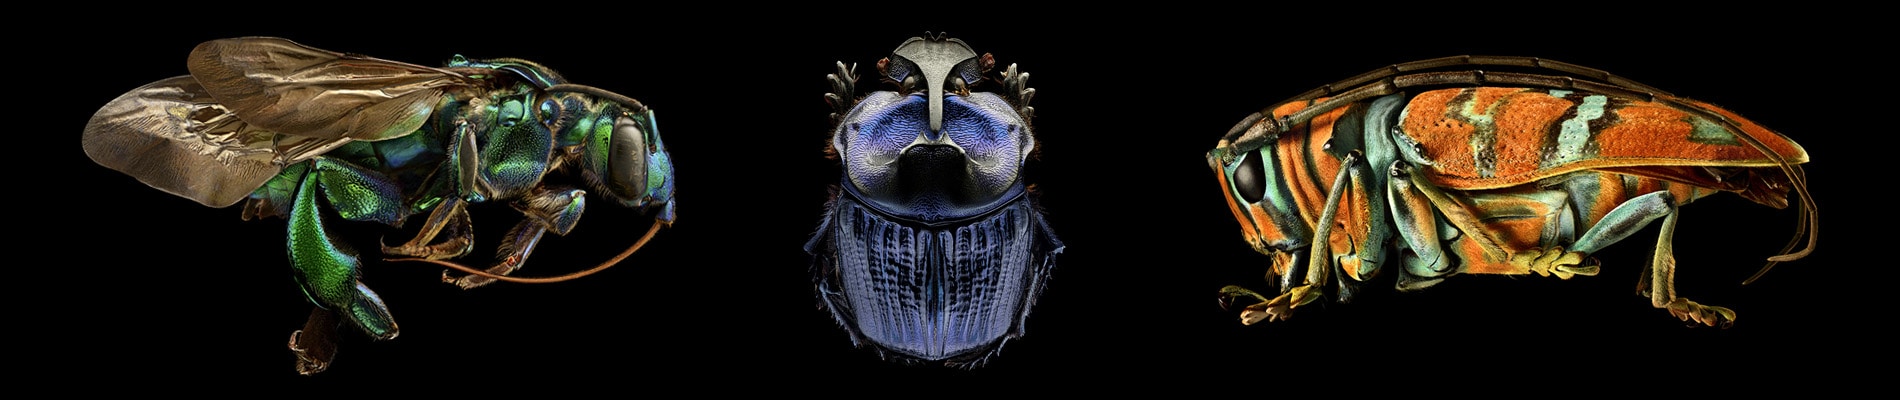 Portraits of Insects